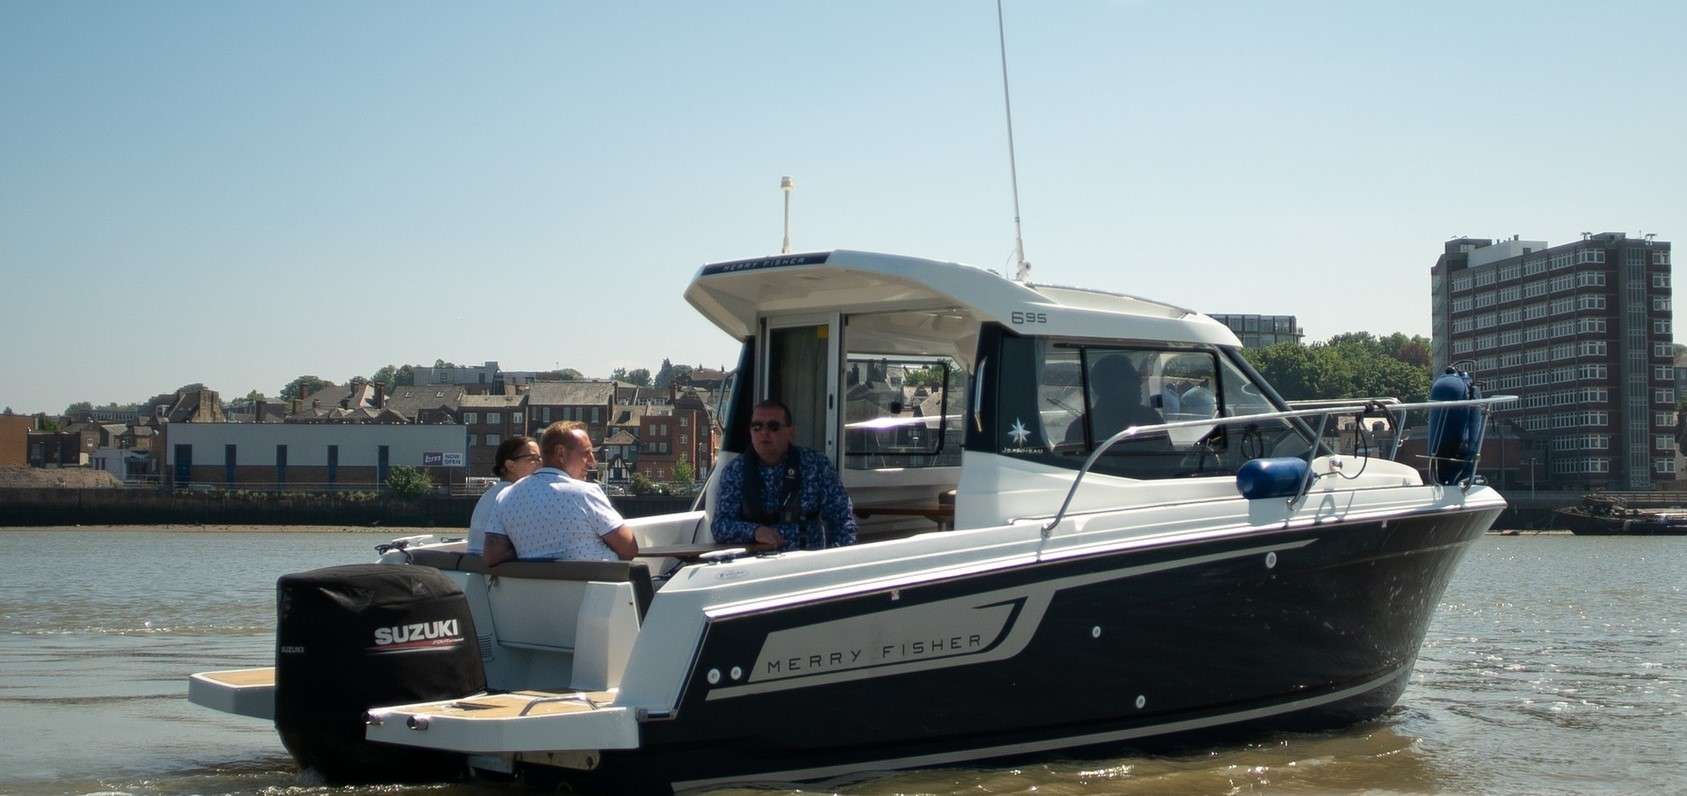 Merry Fisher 695 - Yacht Charter River Thames & Boat hire in United Kingdom England Greater London Saint Mary's Island 1